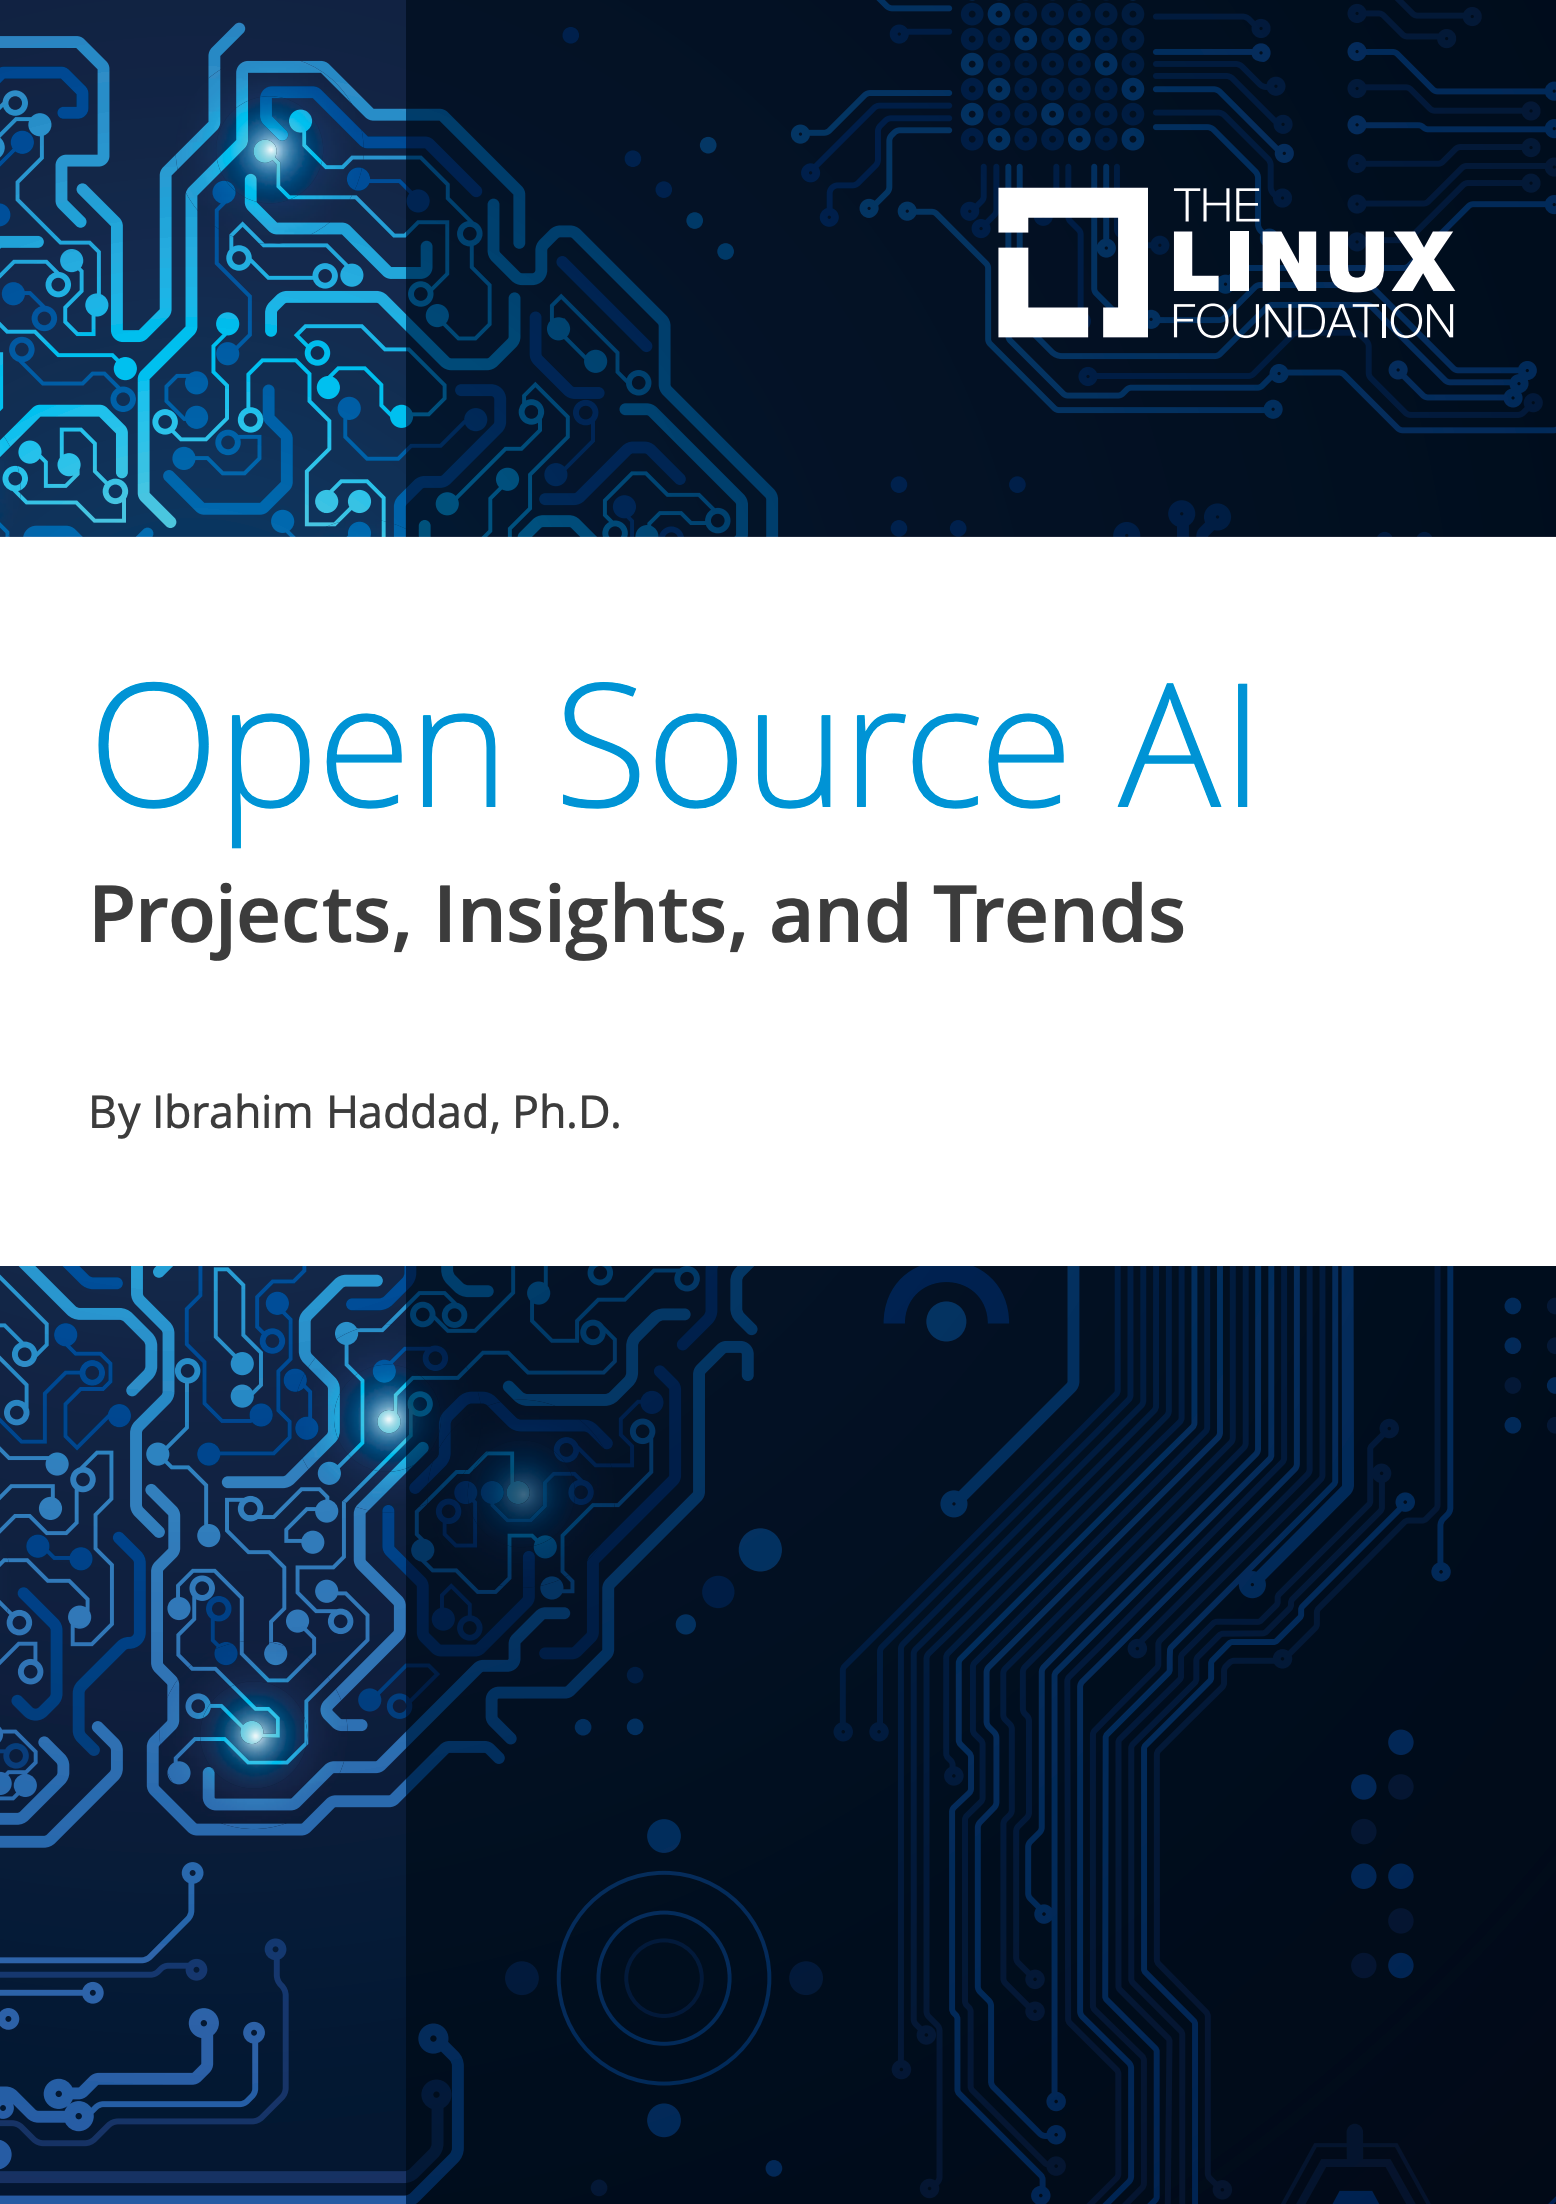 Open Source AI: Projects, Insights and Trends